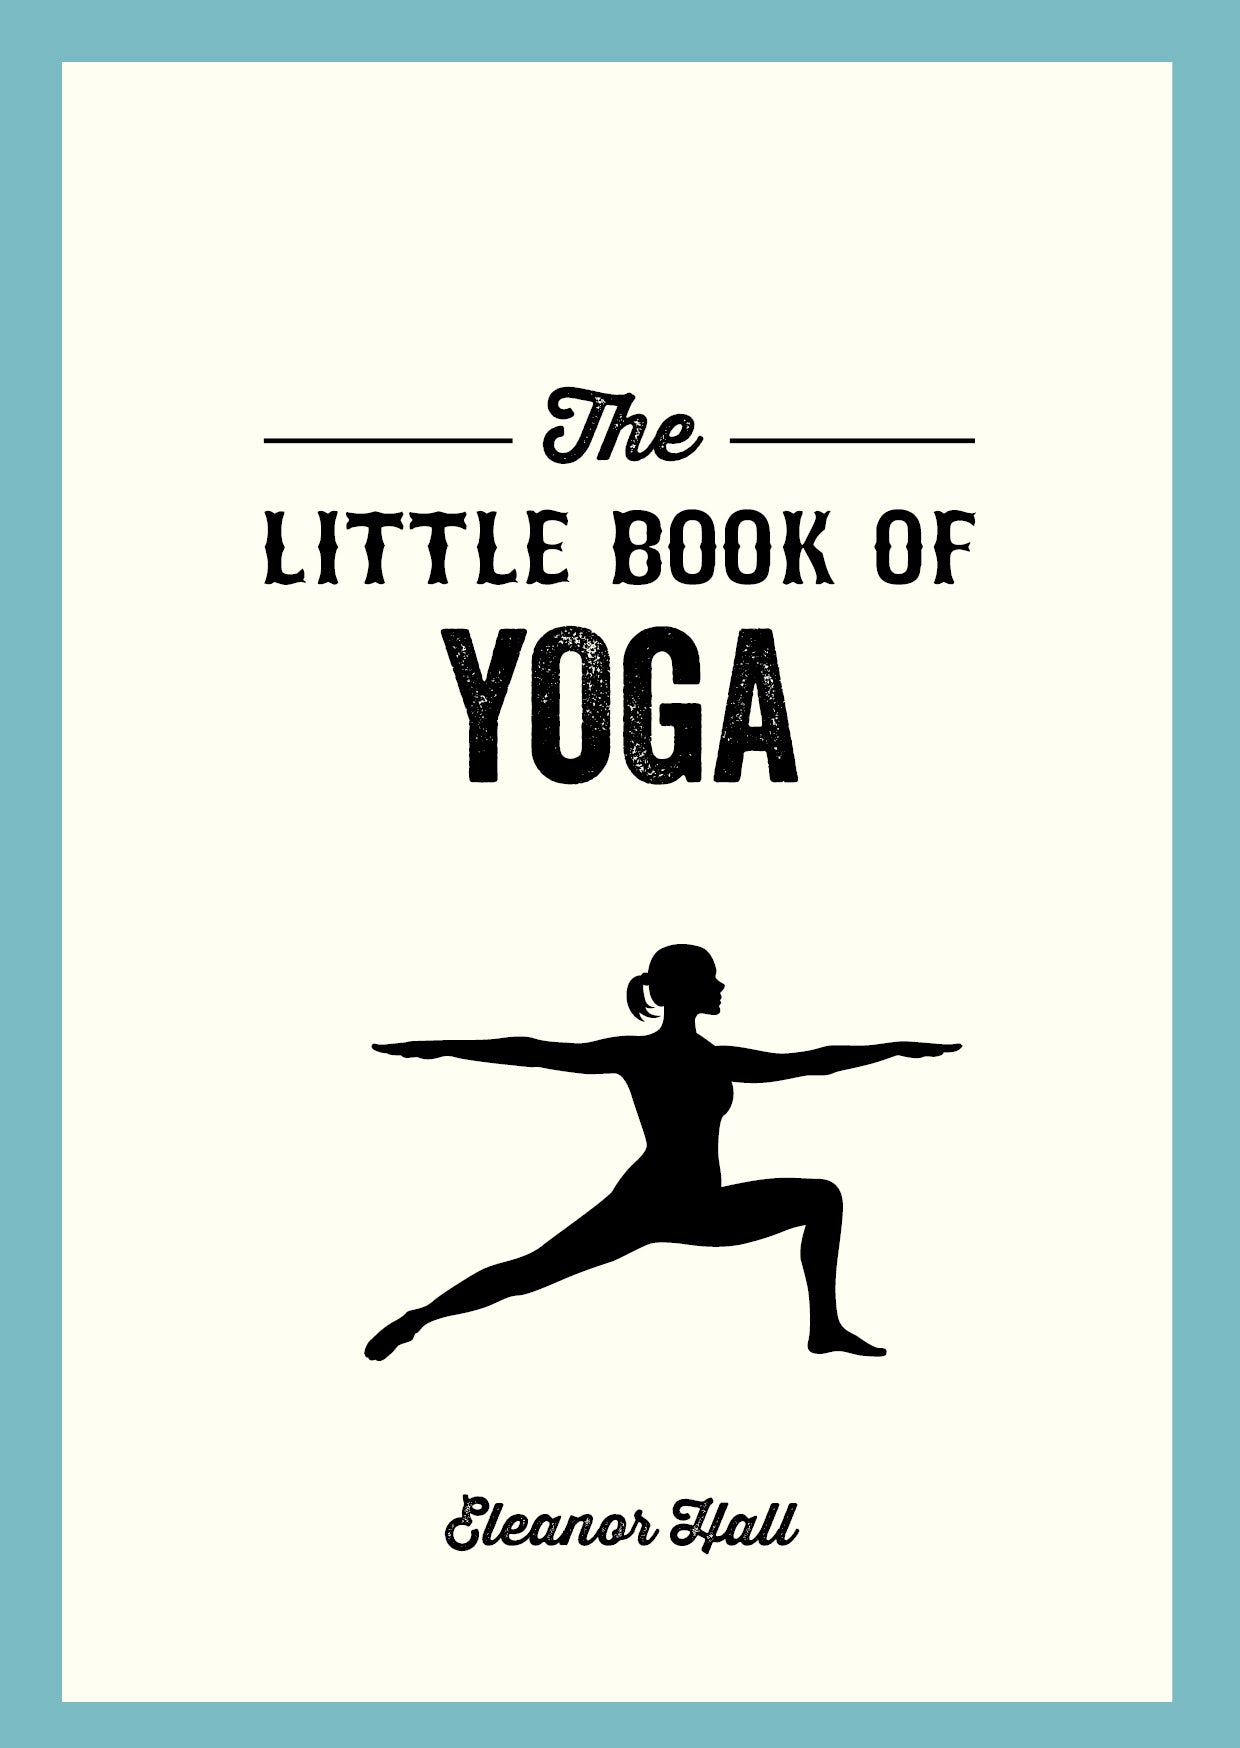 Little Book of Yoga (Summersdale)